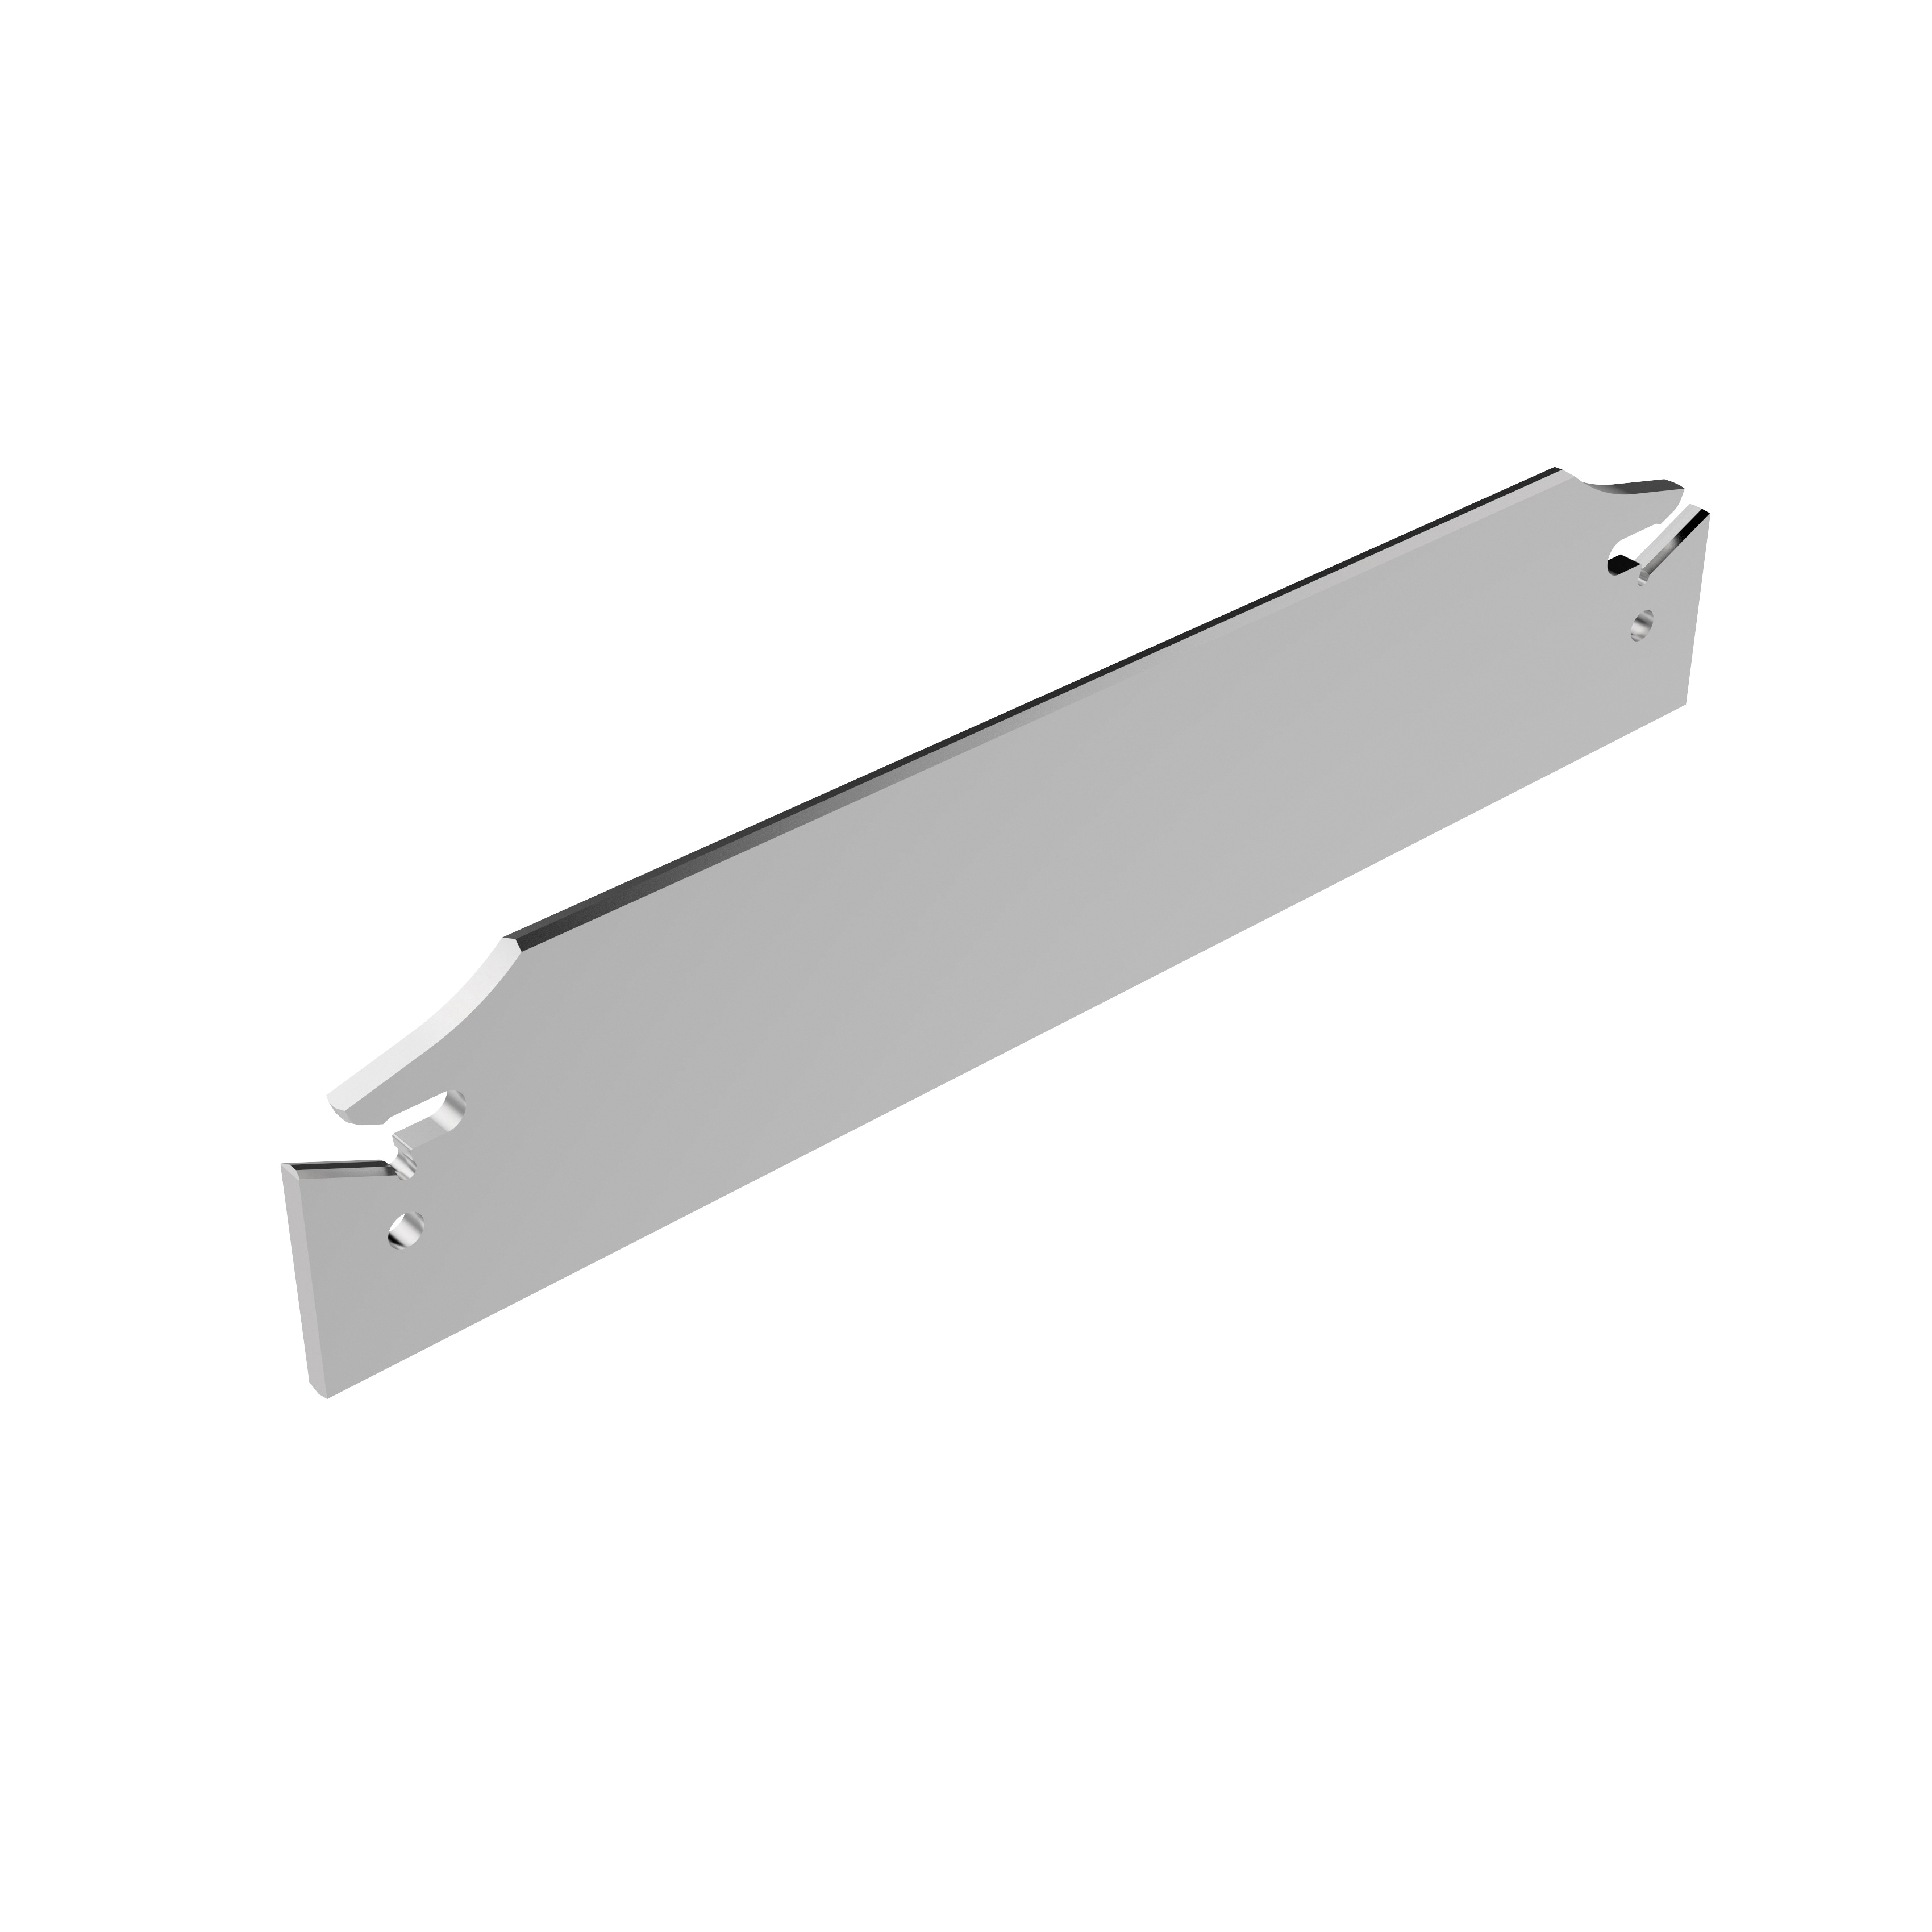 Seco 02569288 Indexable Turning Tool Holder, ANSI Code: DDJNR-16-4D-M, DDJN Tool Holder, DN..43. Insert, Right Hand Cutting, 25.4 mm Square Shank, 93 deg Lead Angle, Negative Rake, 152.4 mm OAL